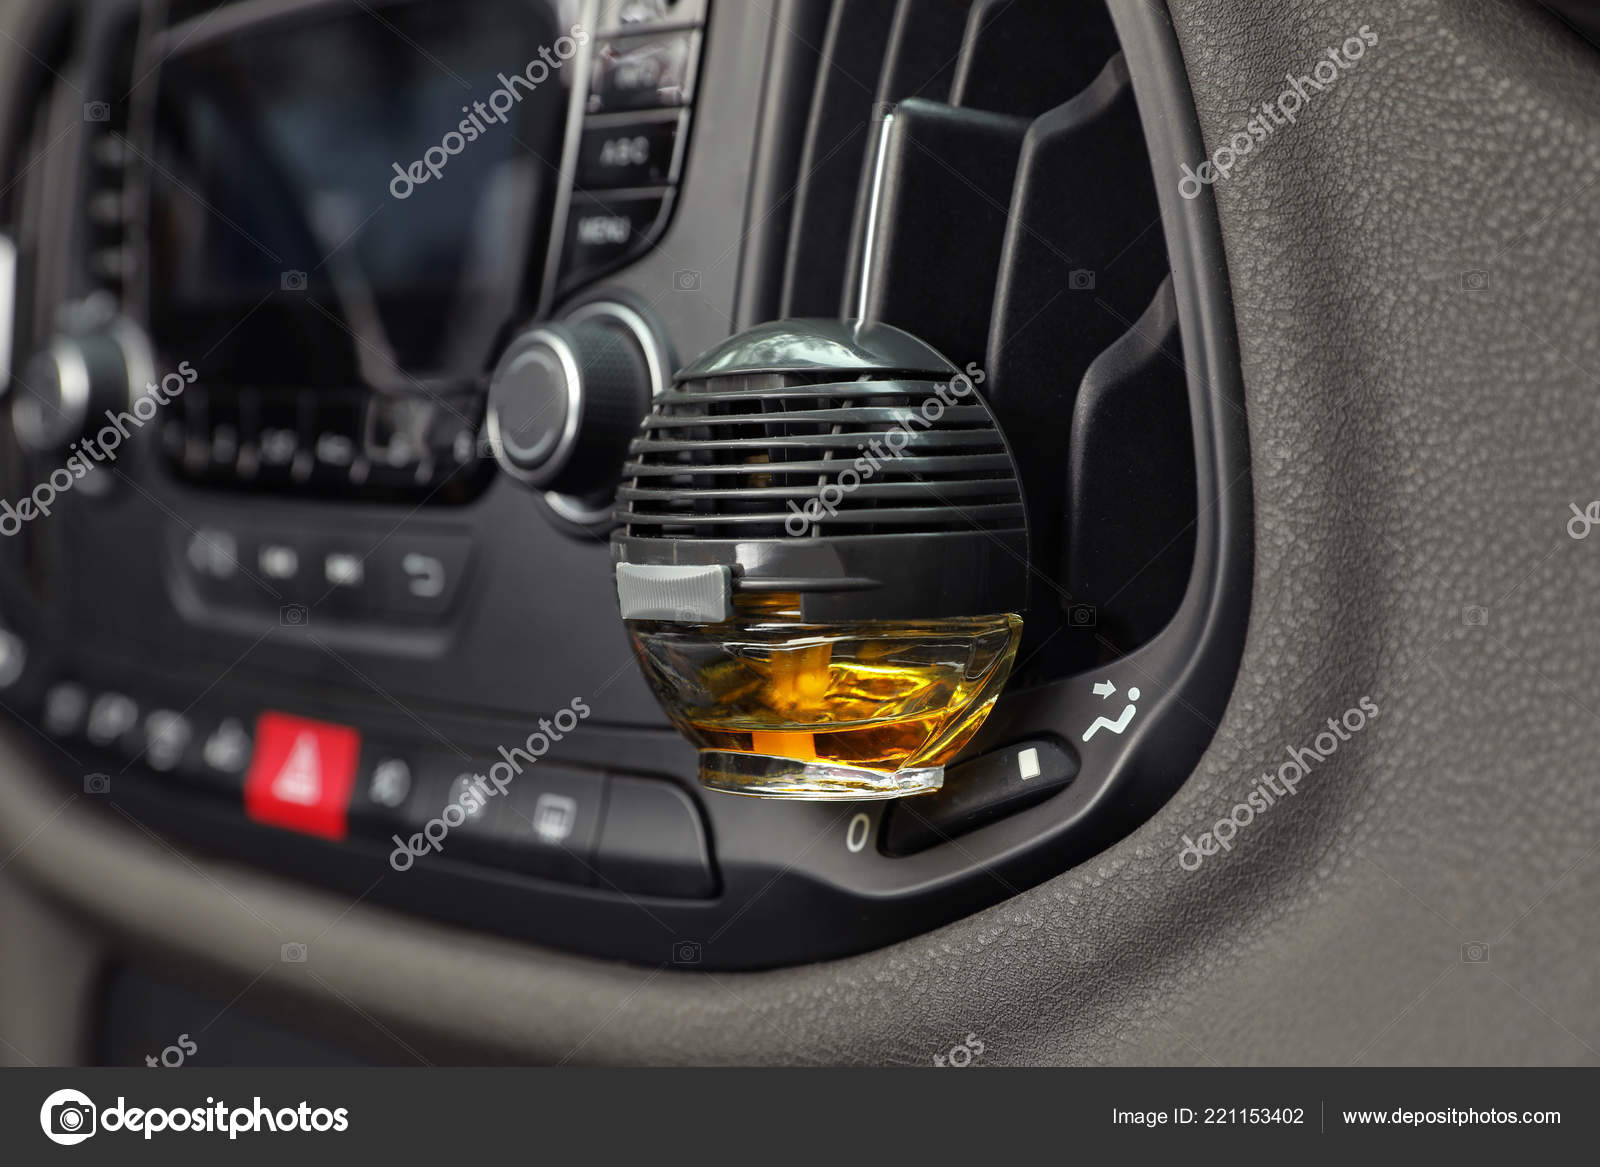 1,885 Car Fragrance Royalty-Free Photos and Stock Images